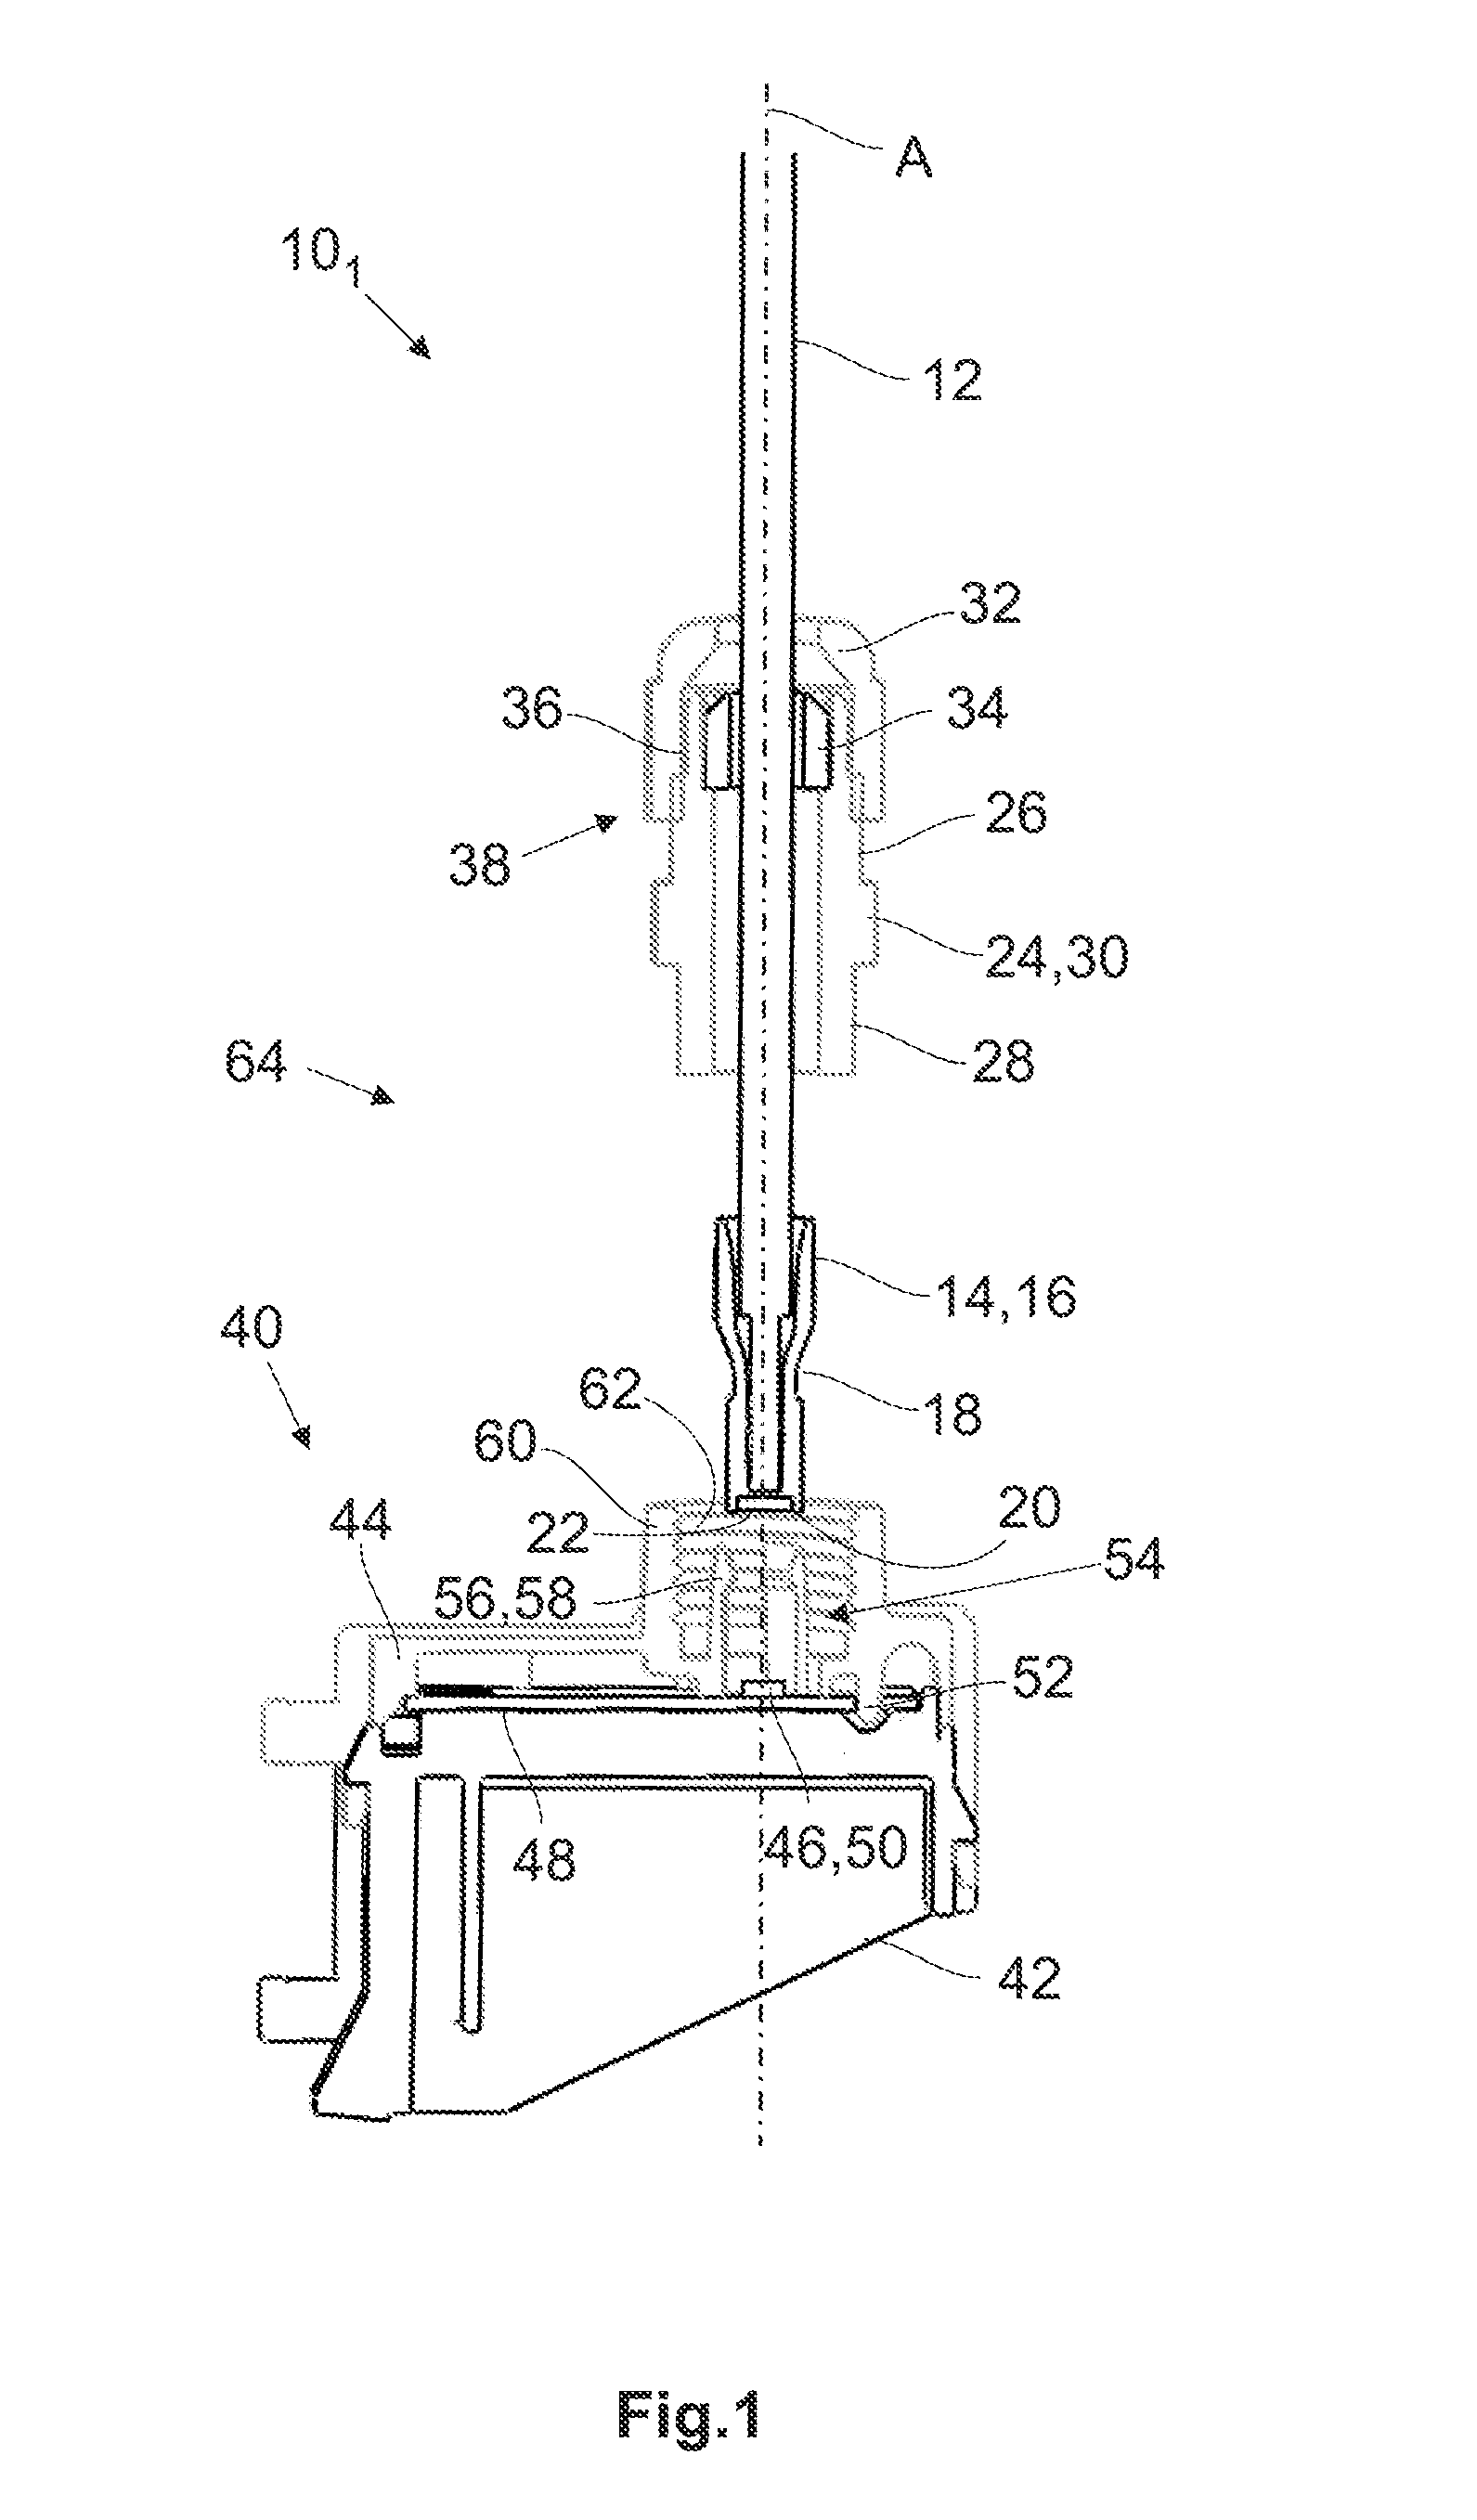 Apparatus for connecting a fiber optic or rigid light guide to a light source